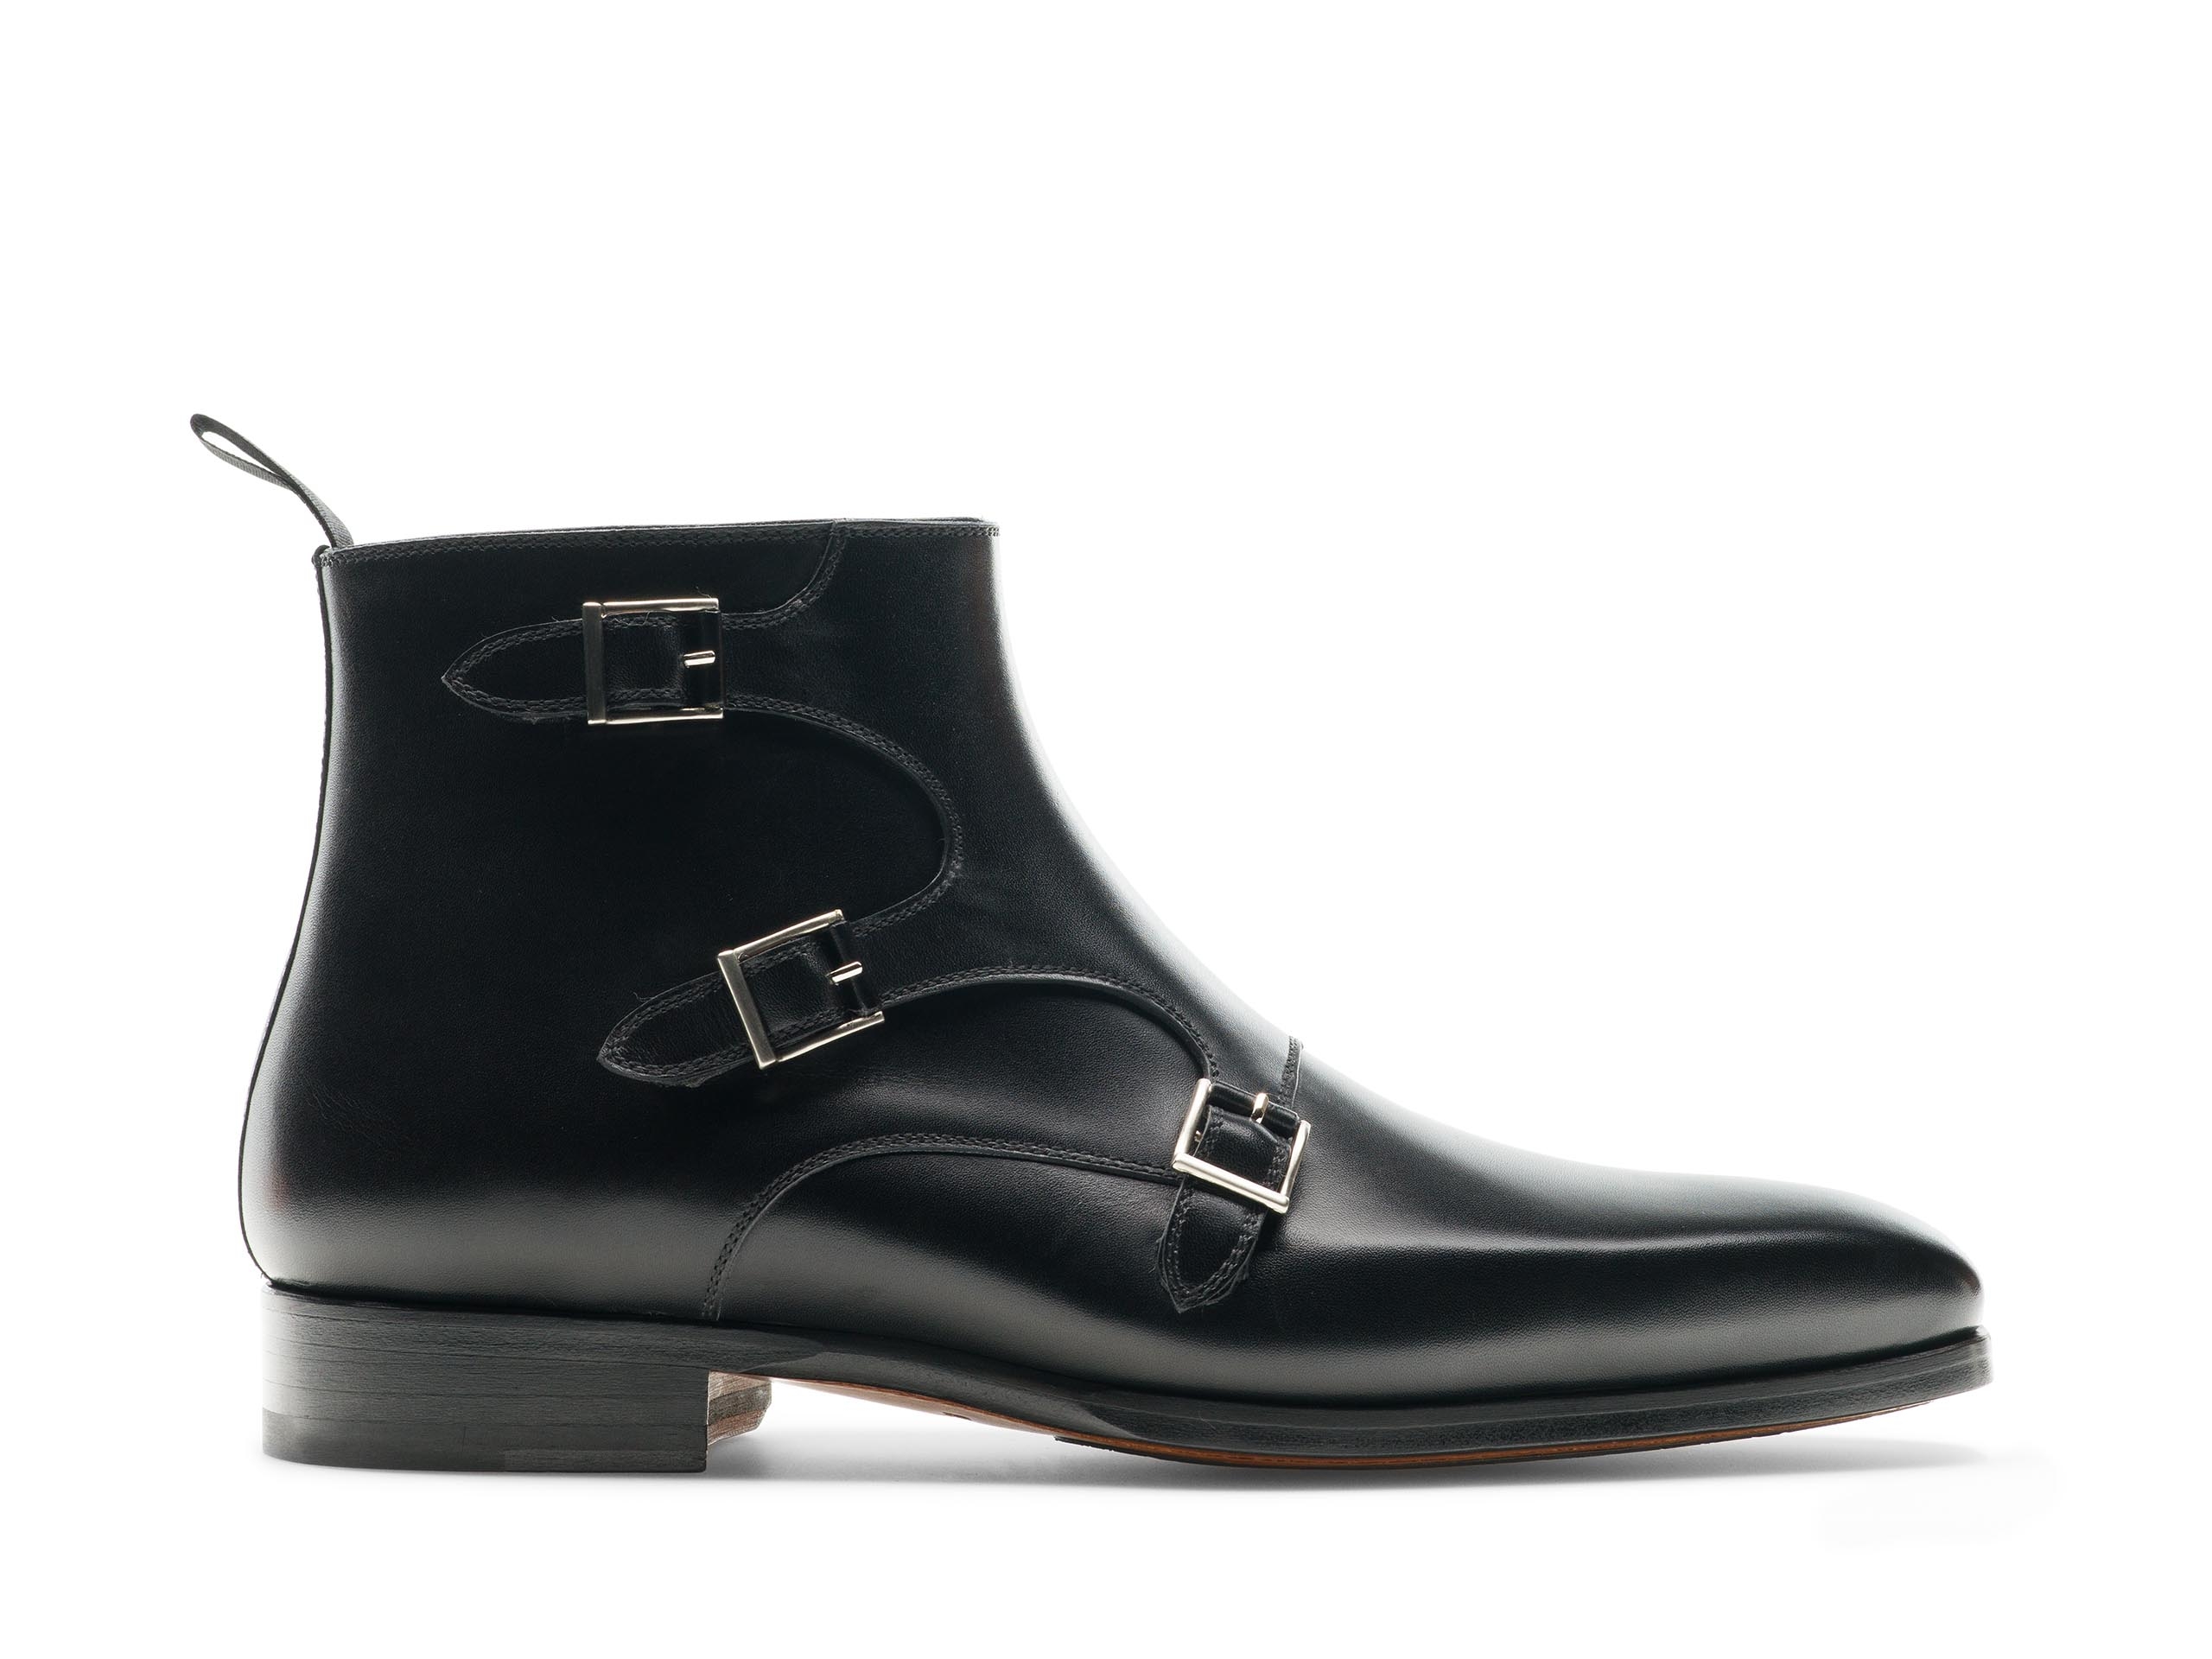 Buckle Boot Elegance: Magnanni Leather Monk Strap Buckle Boots